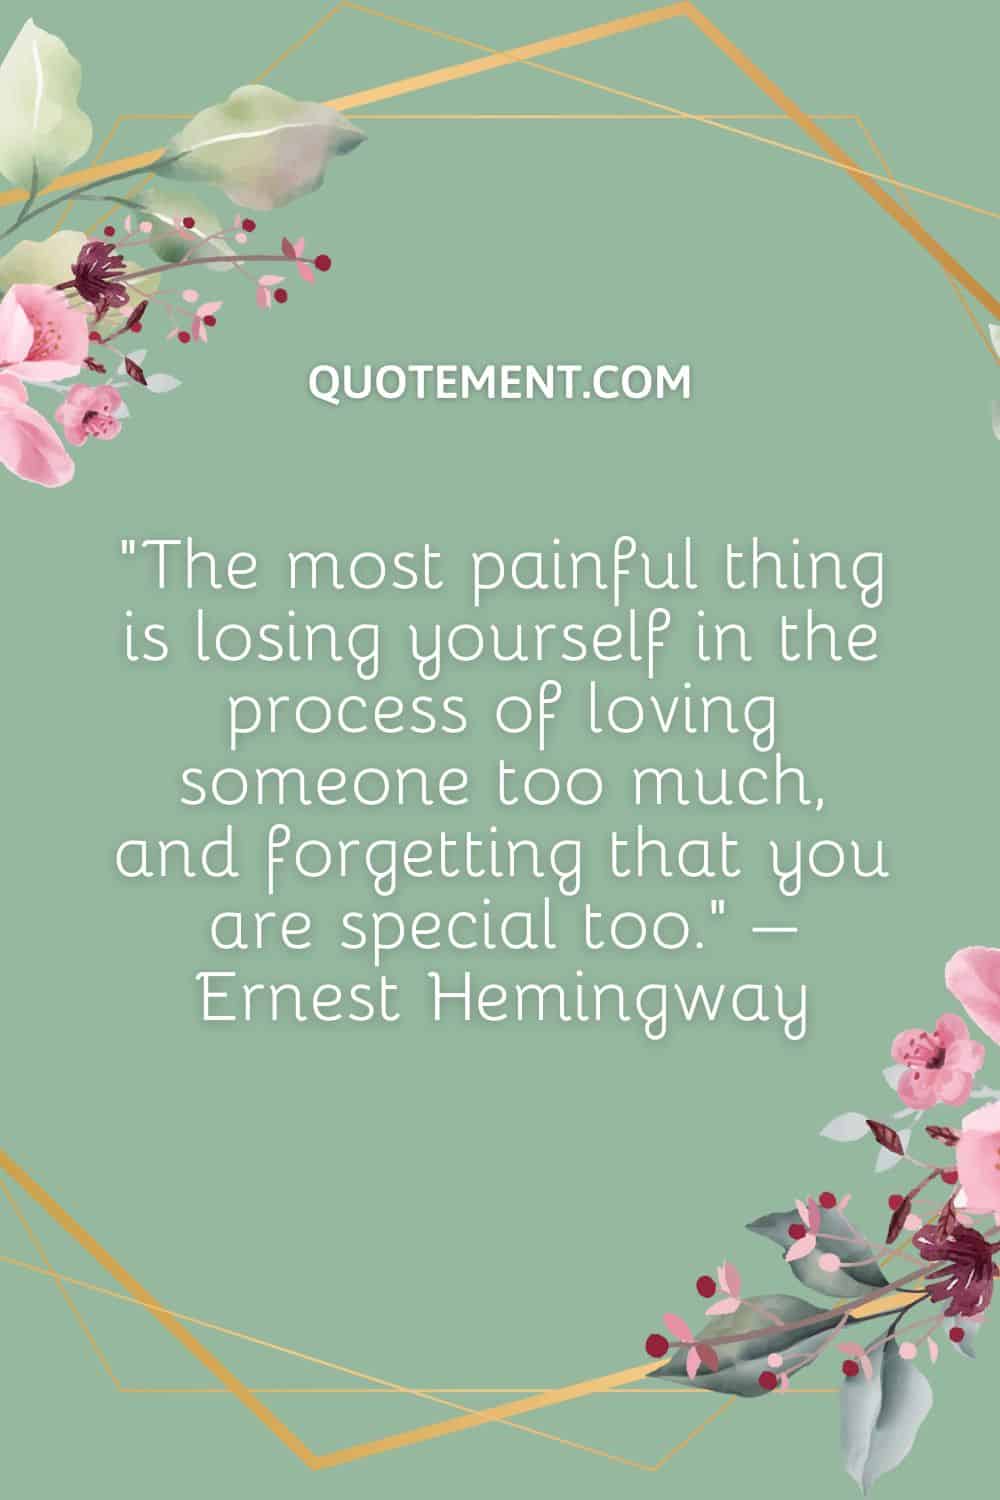 The most painful thing is losing yourself in the process of loving someone